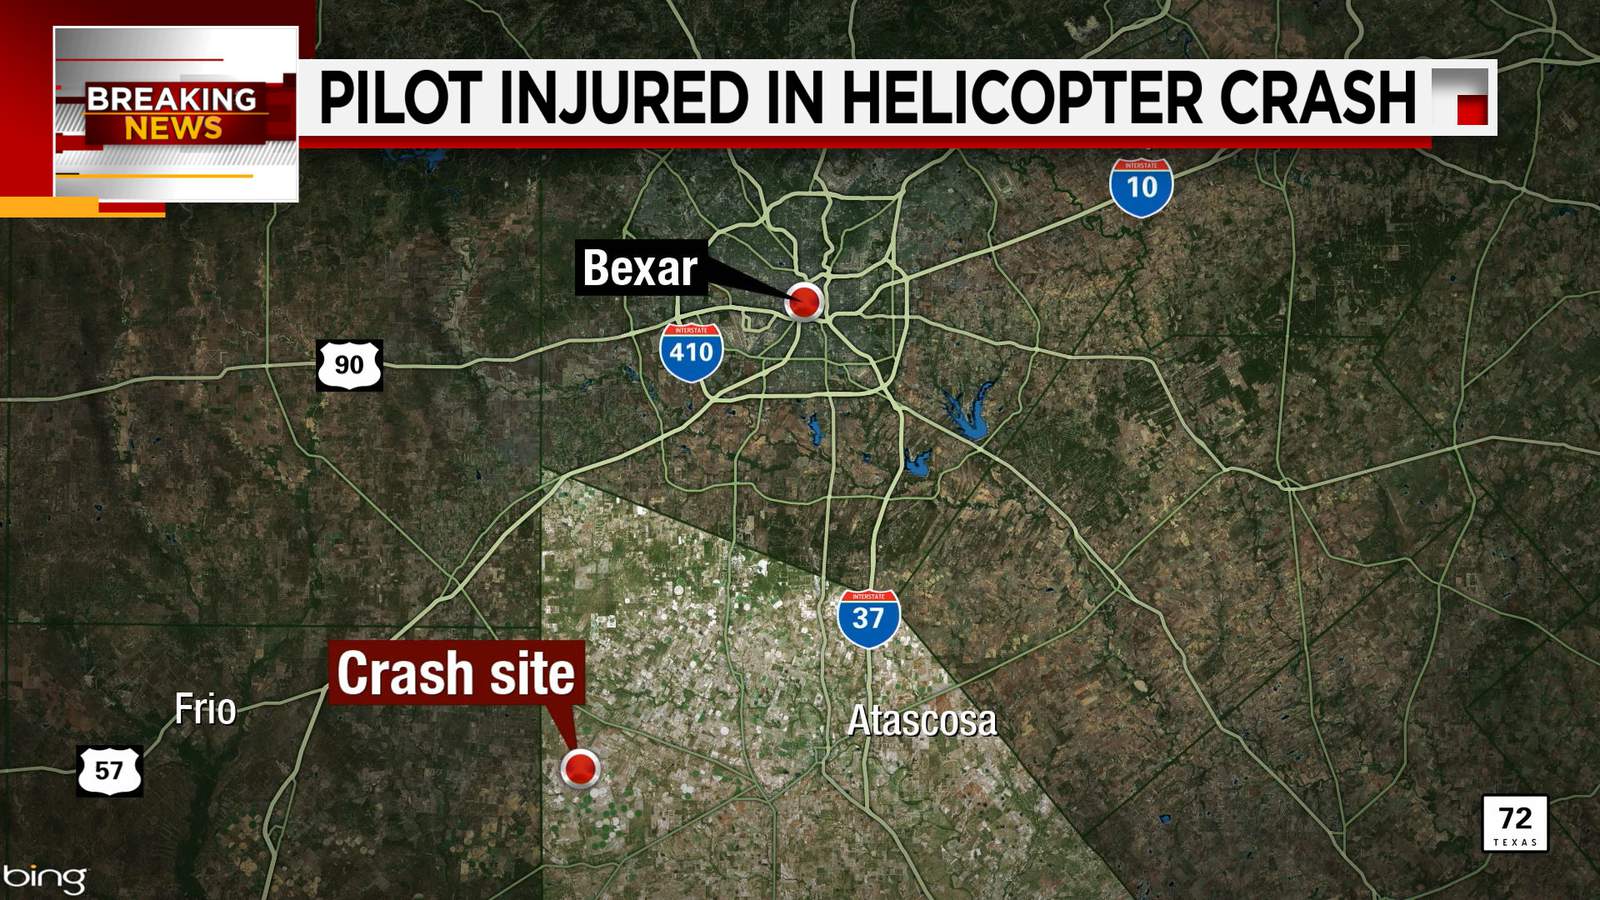 Officials: Pilot airlifted, hospitalized after helicopter crash in Atascosa County